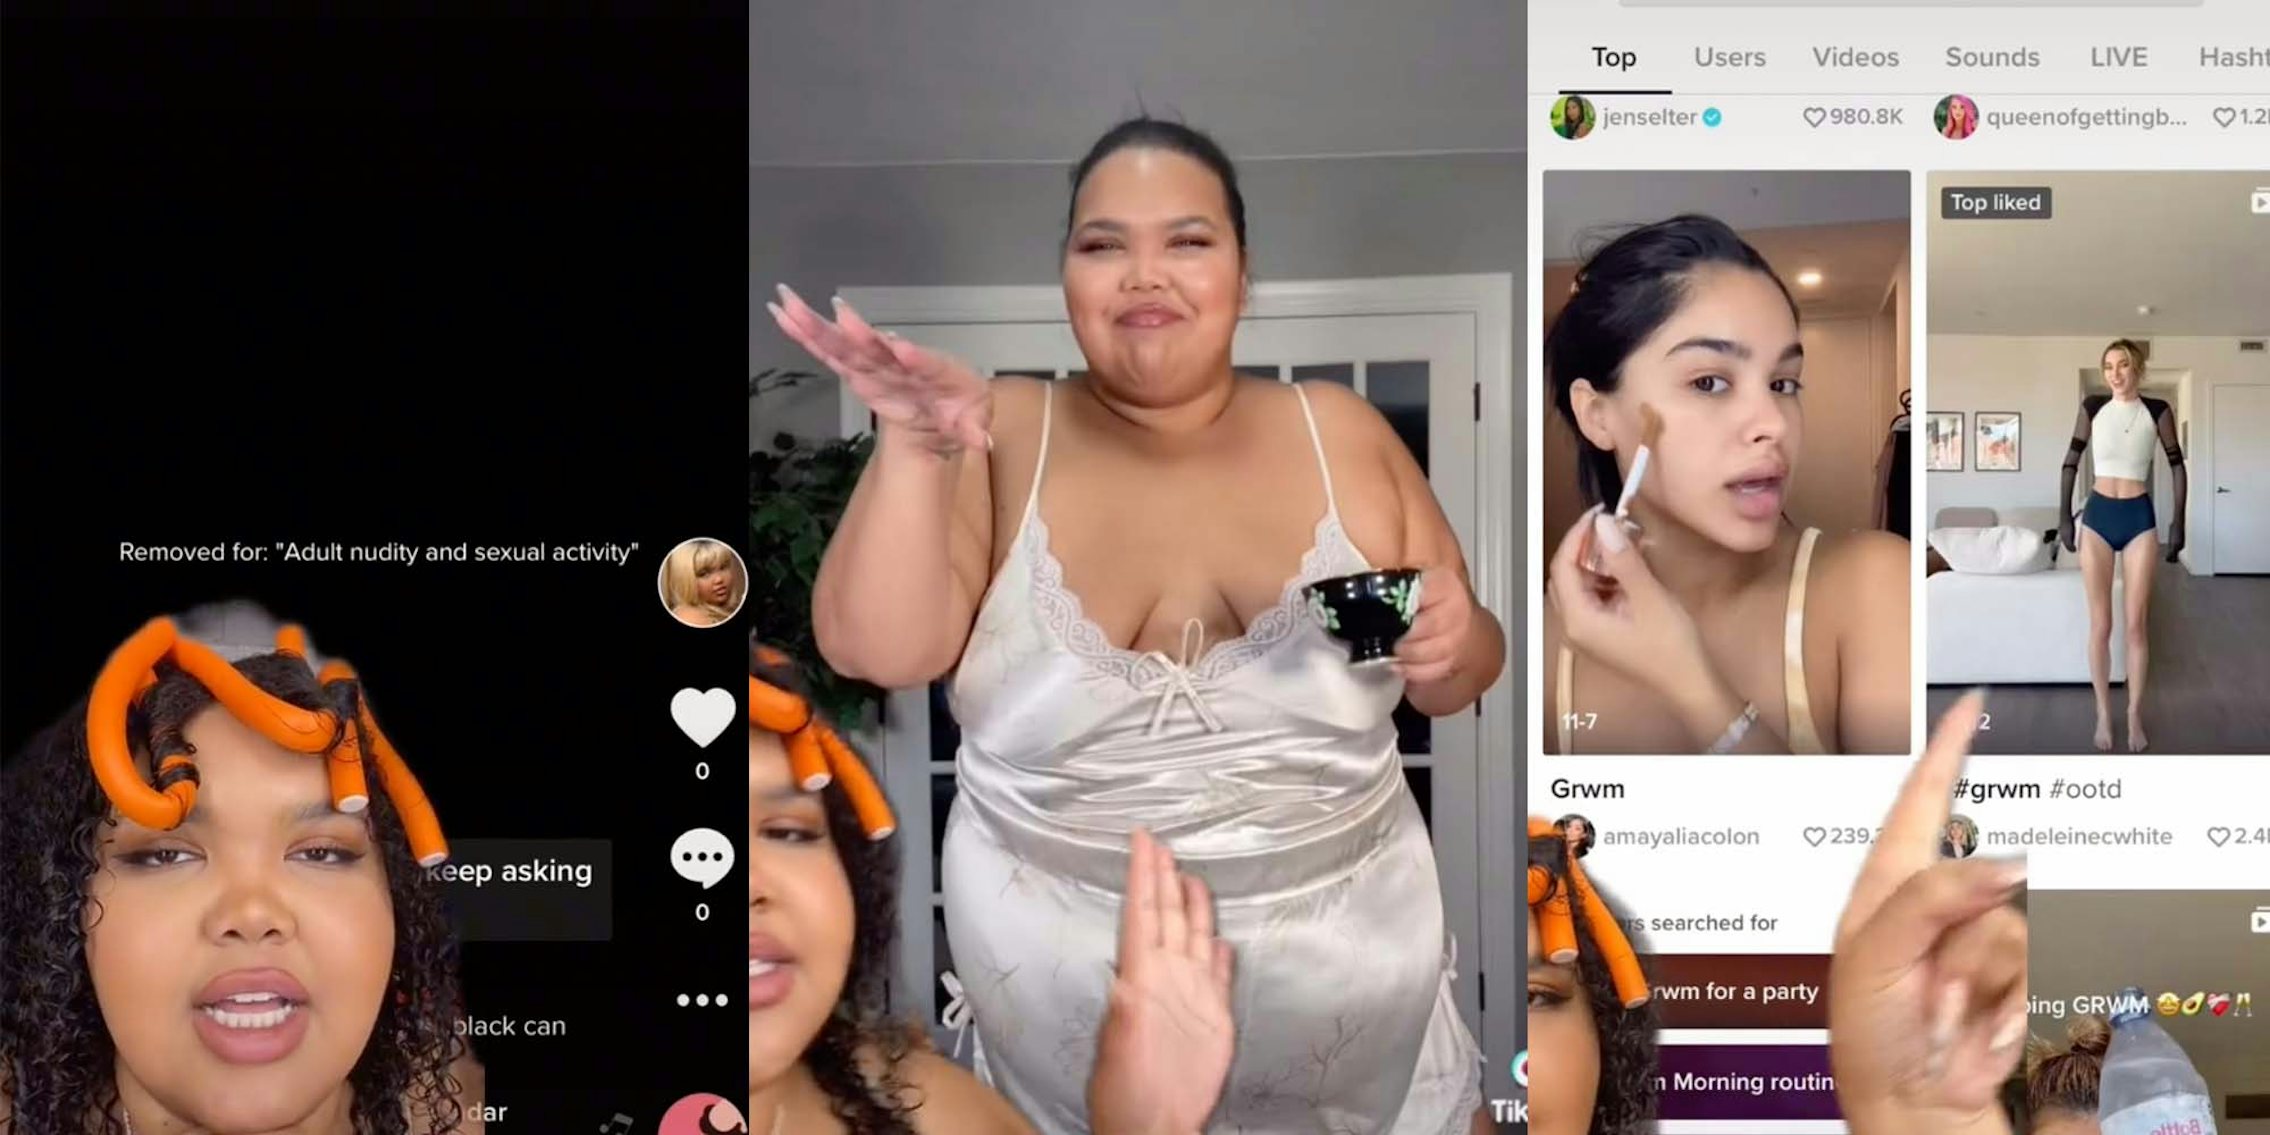 In a TikTok, plus size influencer Moe Olivia said her content is being removed because she is fat.